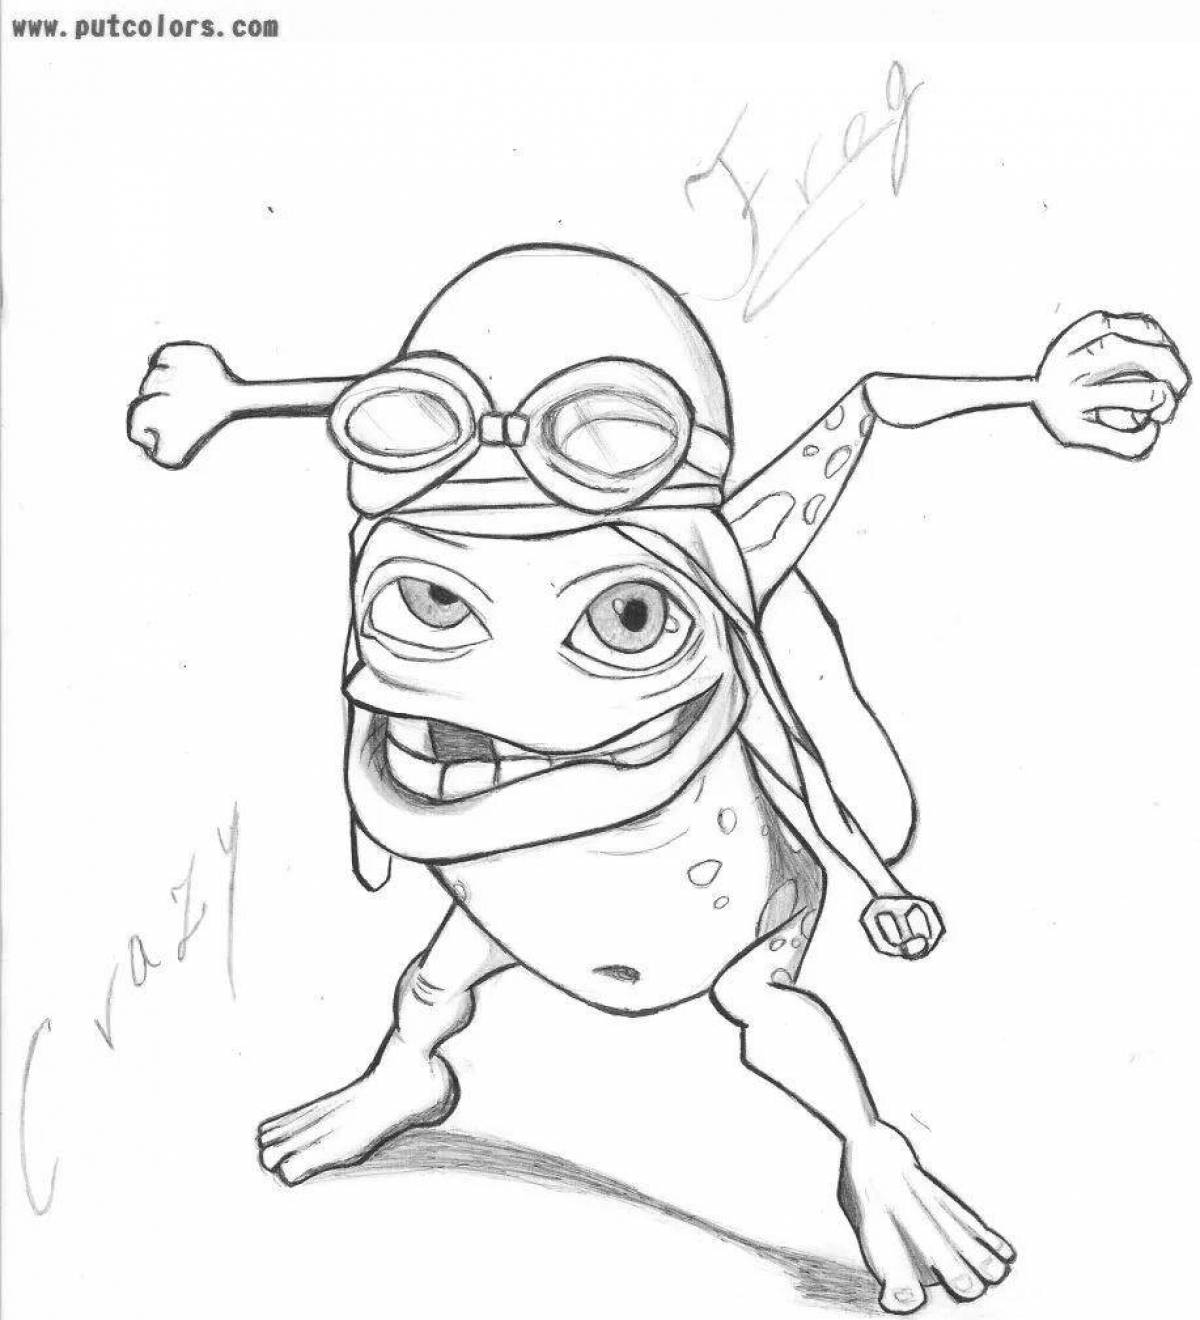 Crazy frog coloring book